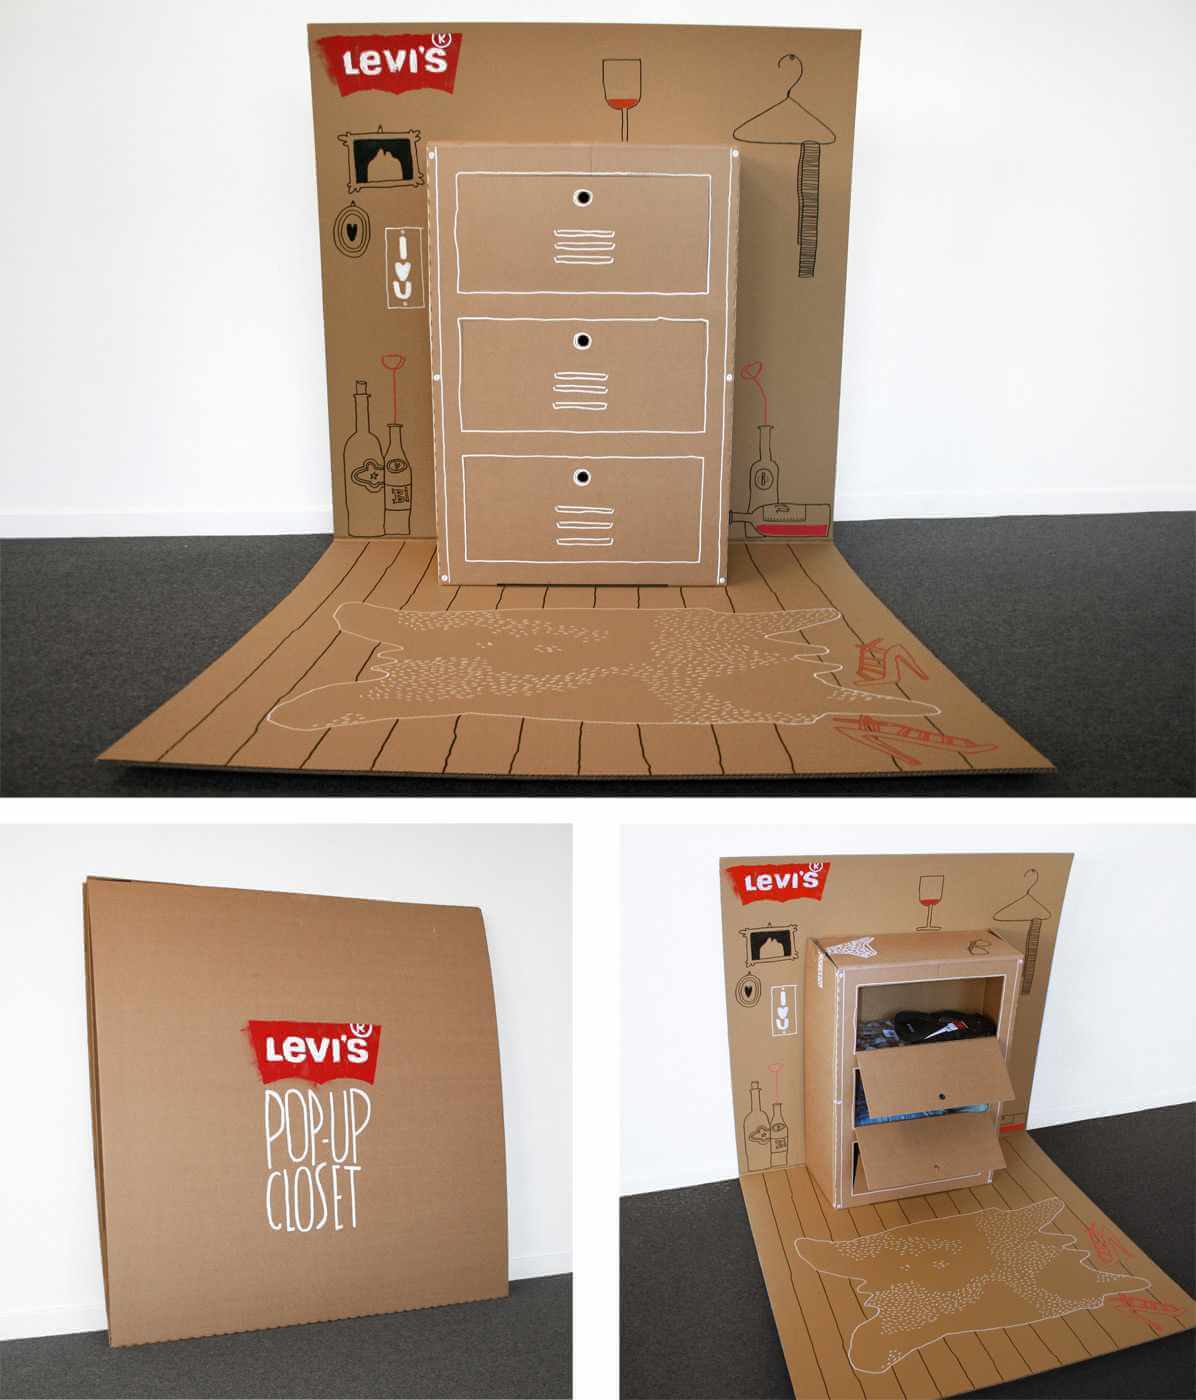 A direct mail piece from Levi’s